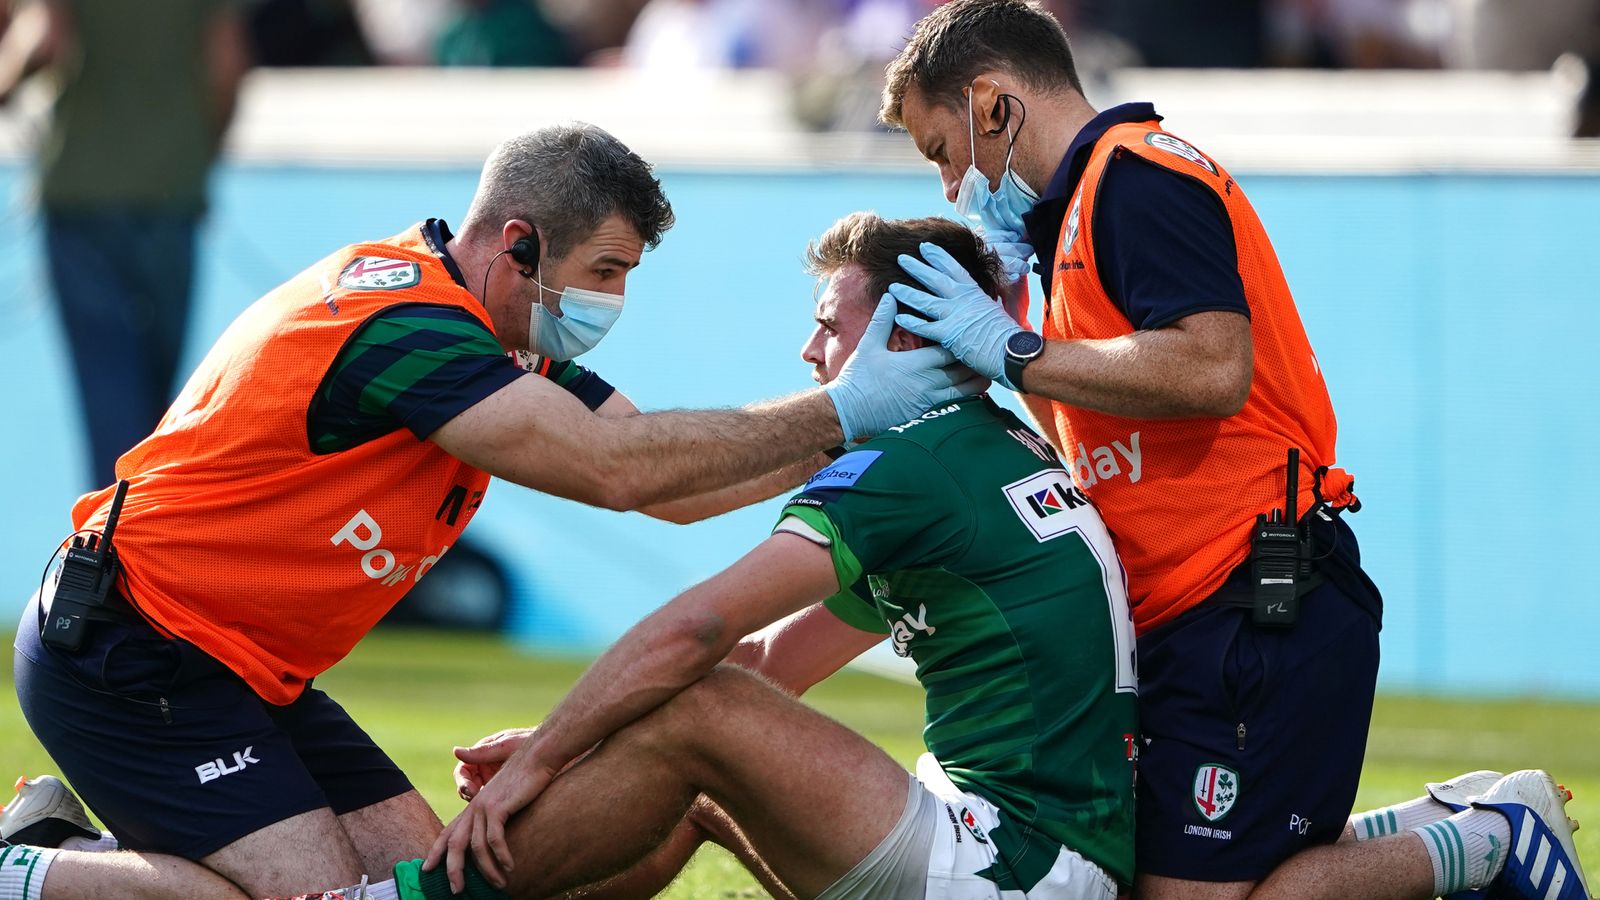 World Rugby extends concussion stand-down period to 12 days in significant protocol change